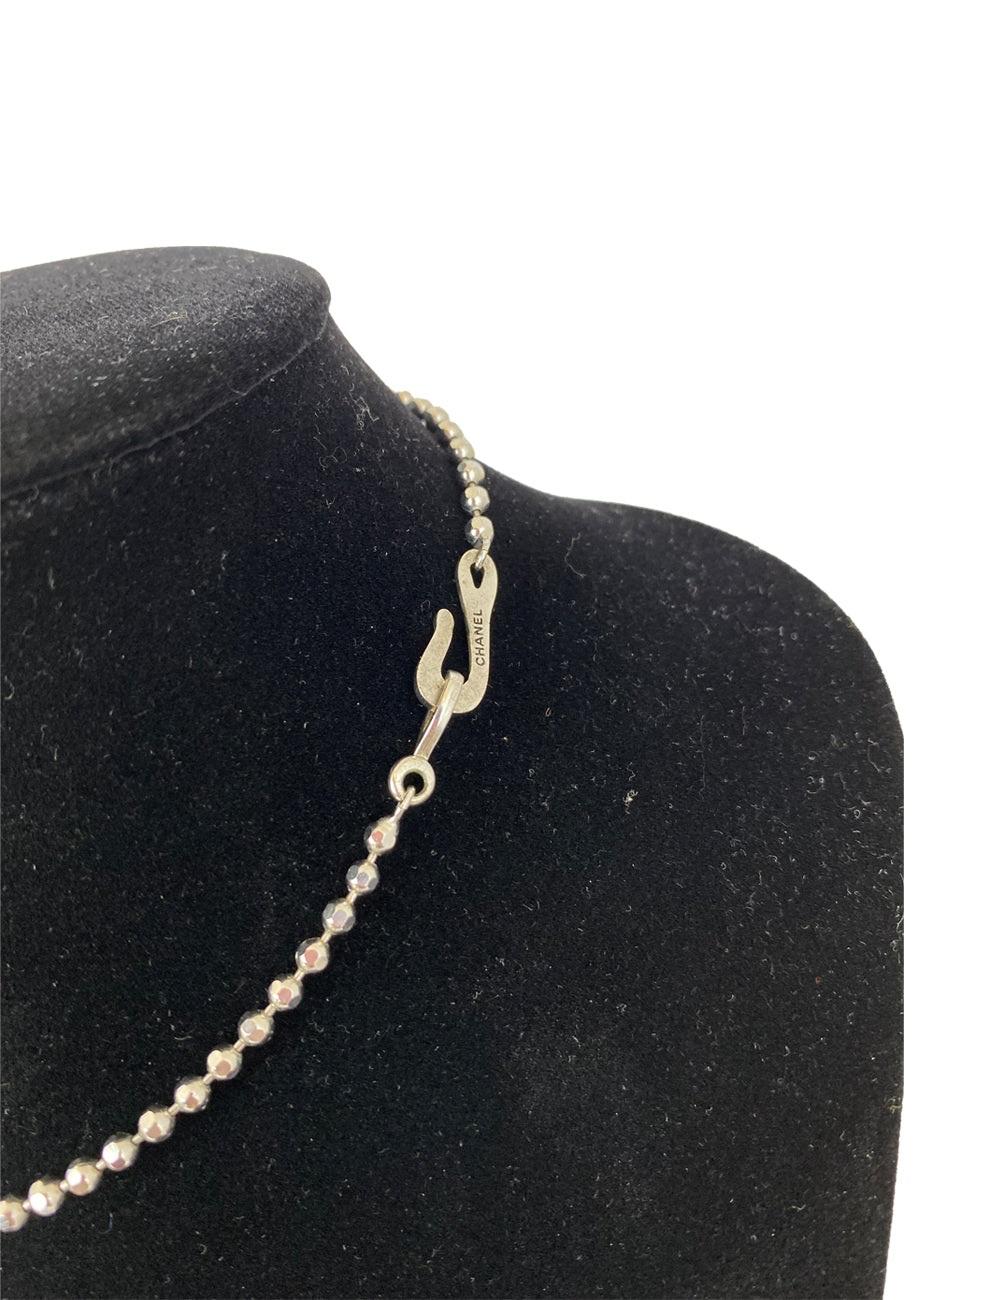 Vintage Chanel Metallic Camellia Necklace In Excellent Condition For Sale In Amman, JO